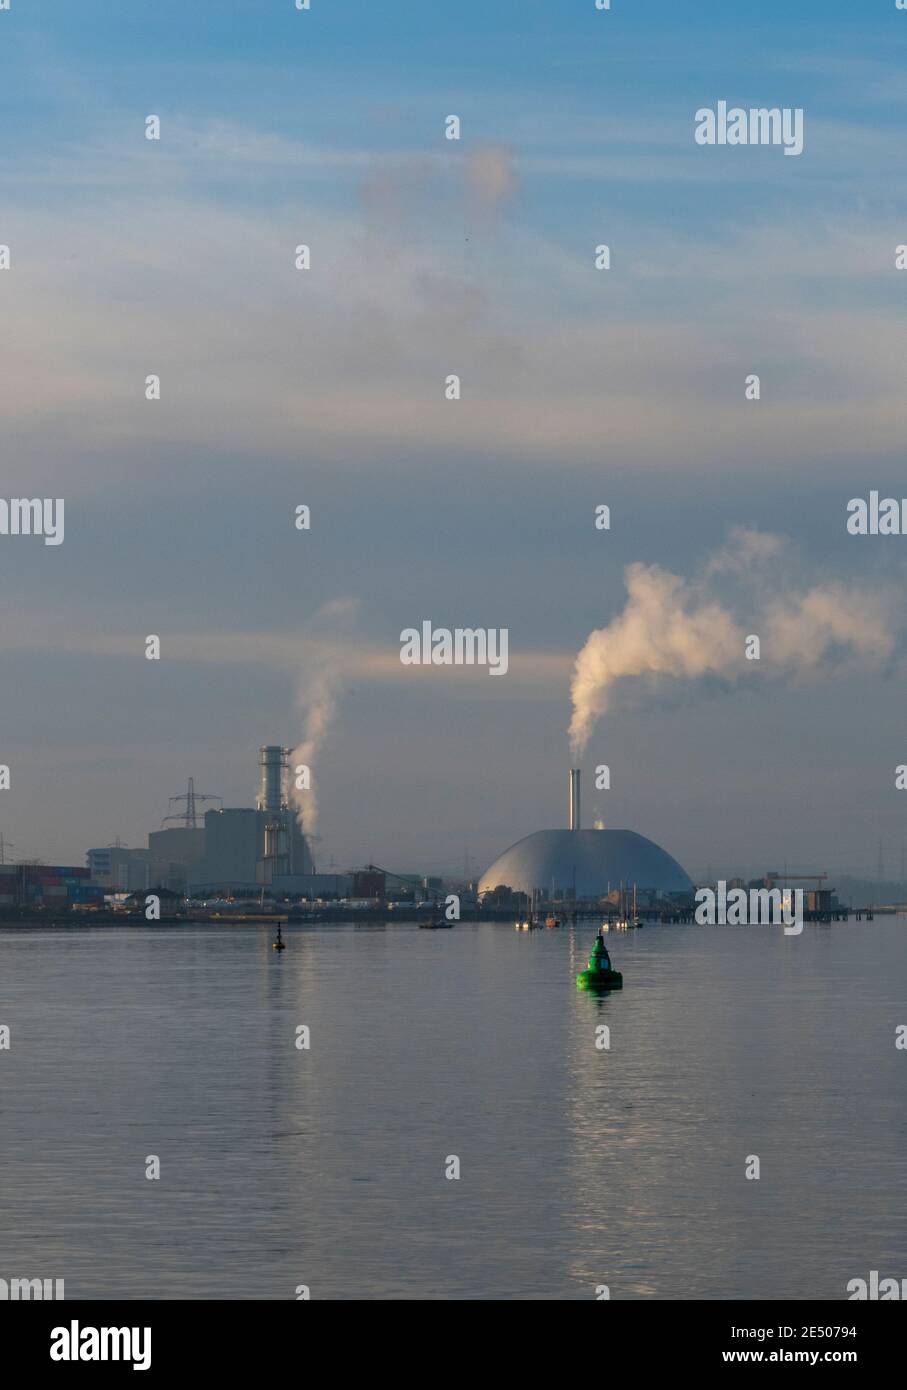 the environmental waste incinerator t marchwood in the port of southampton docks burning incinerating rubbish and producing green power and energy Stock Photo